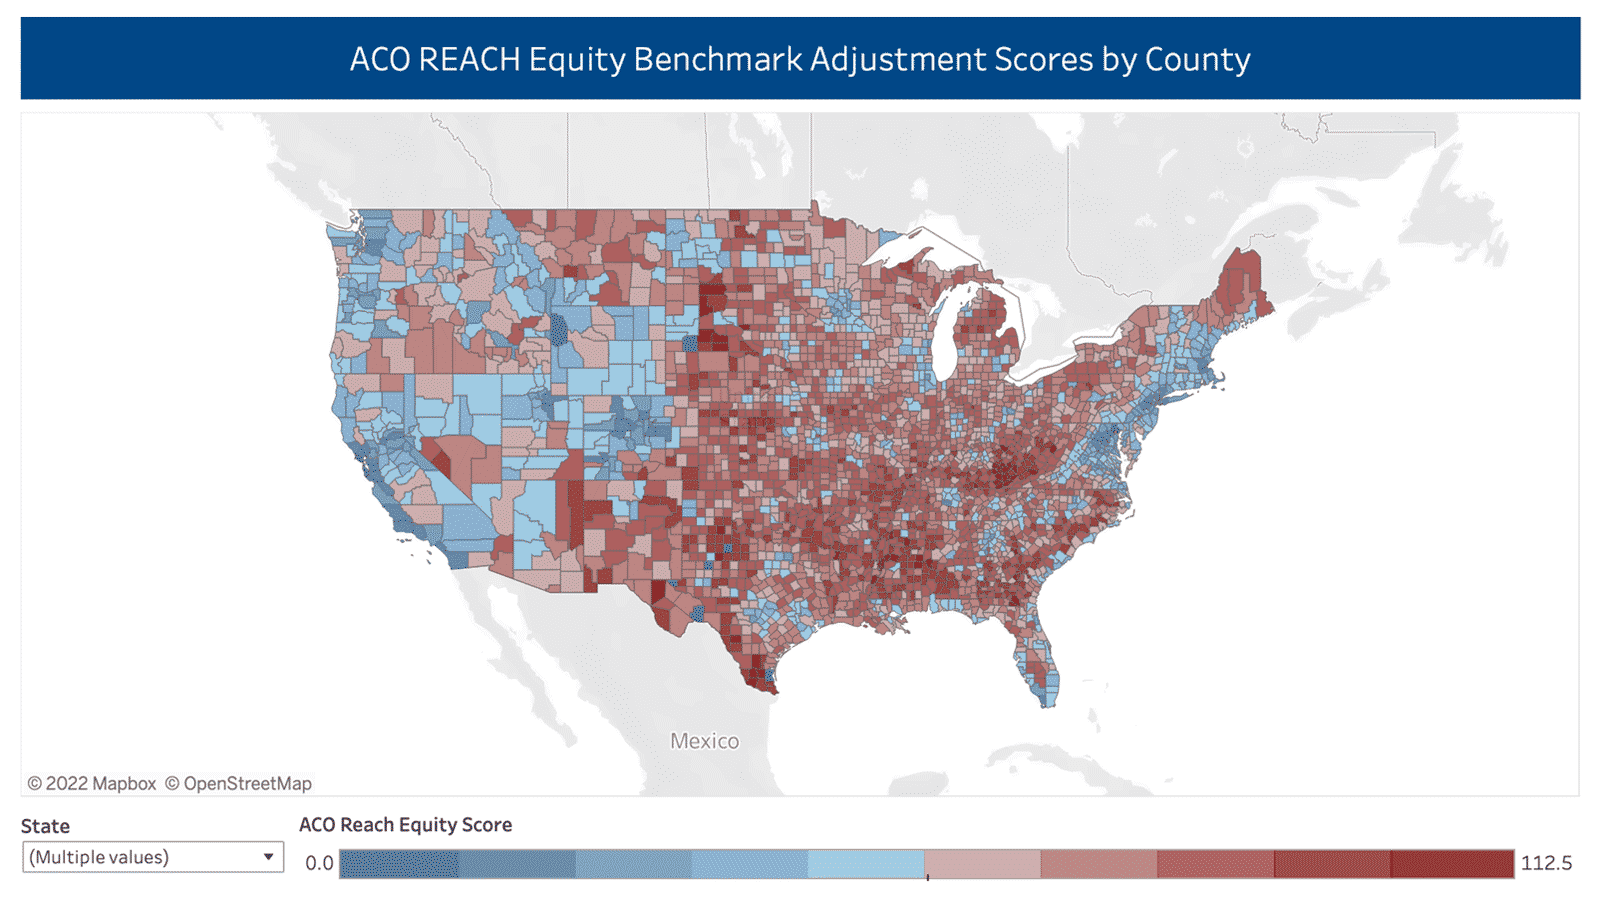 ACO REACH Equity Benchmark Adjustment Scores by County